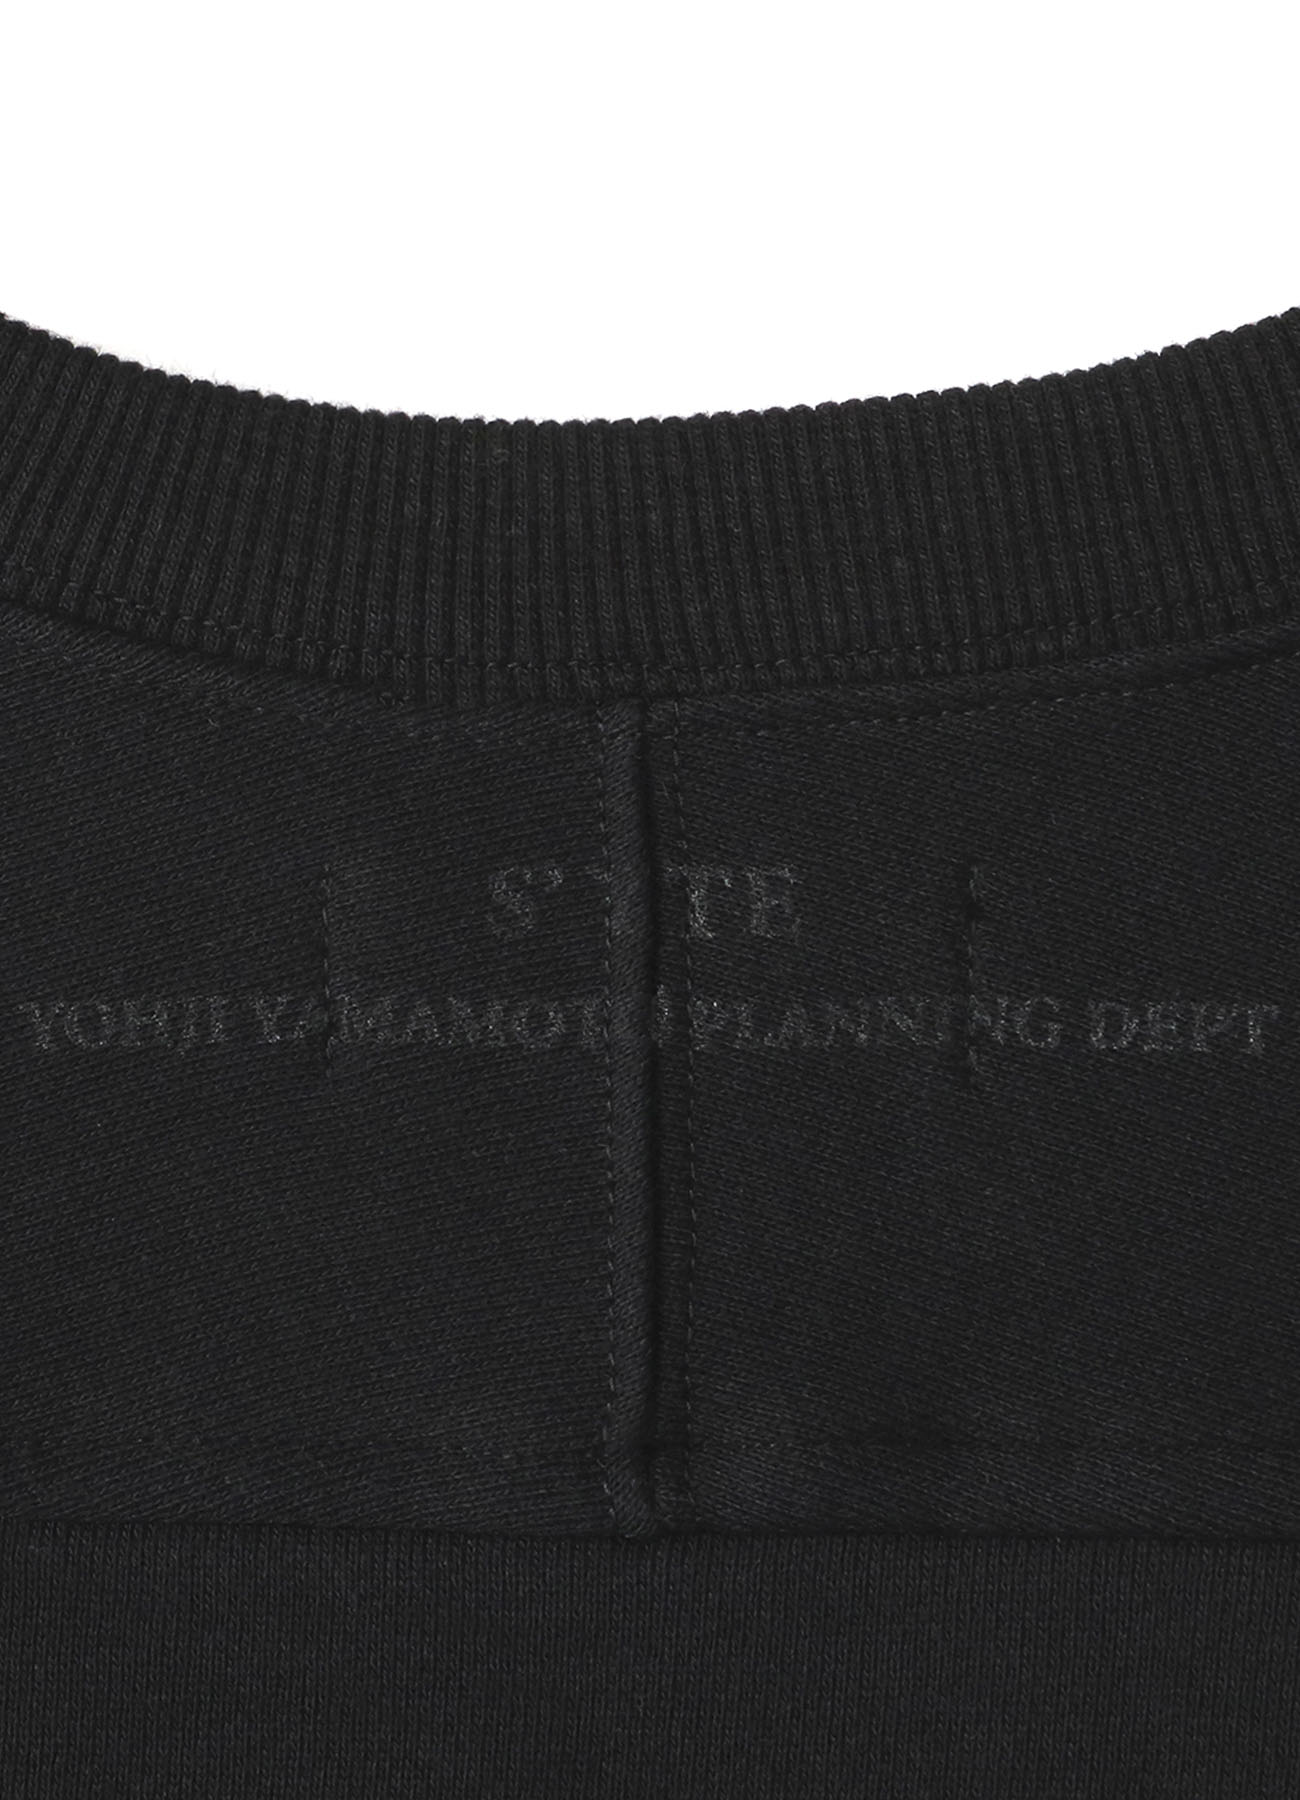 French Terry Stitch Work Front「Black is Modest」Message Crewneck Pullover